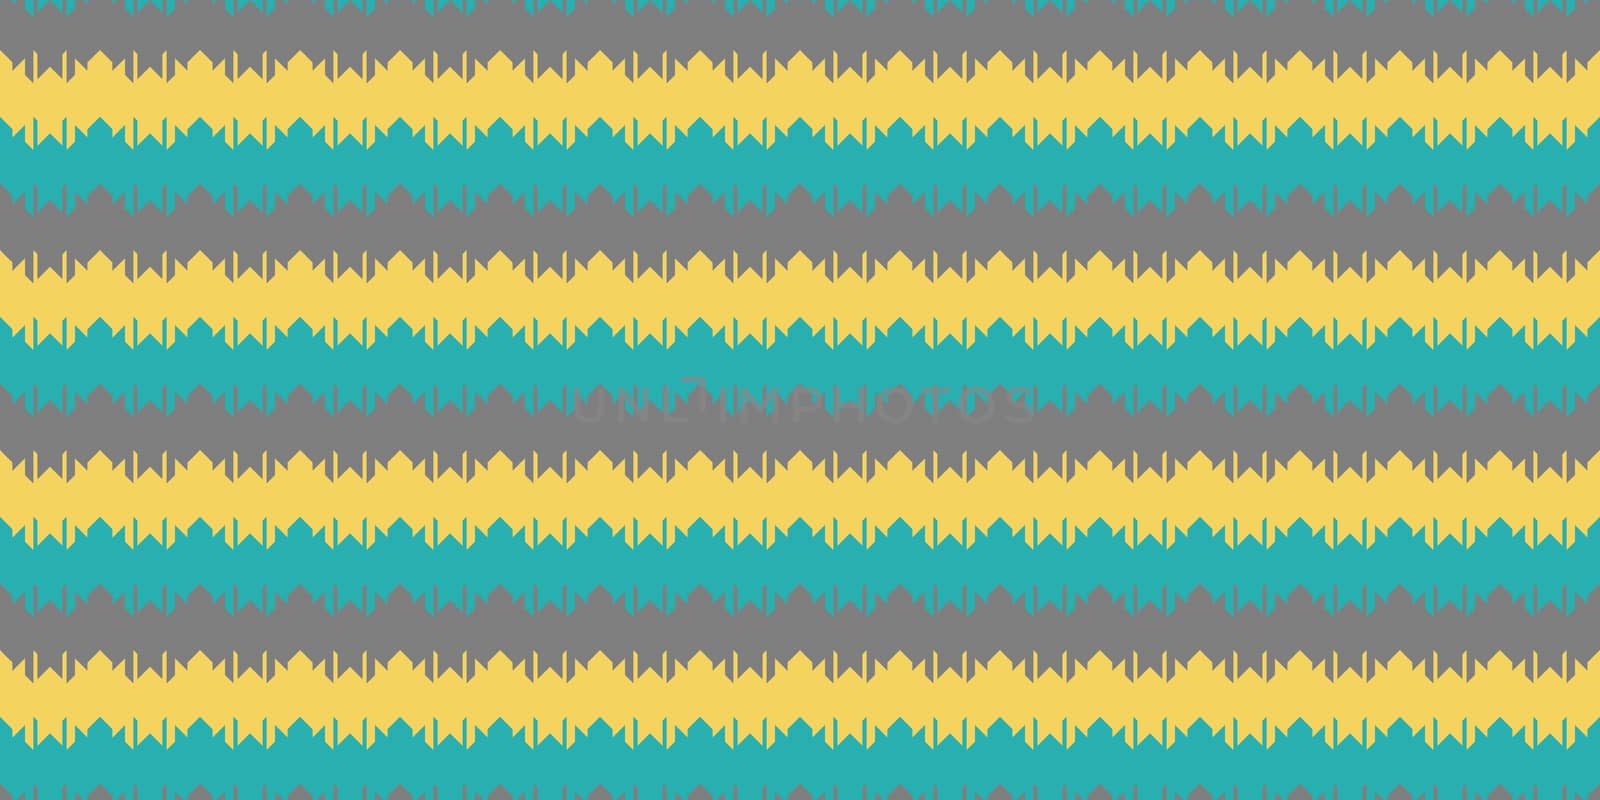 Blue Yellow Grey Chevron Geometry Background. Seamless Zigzag Texture. Modern Striped Pattern. by sanches812